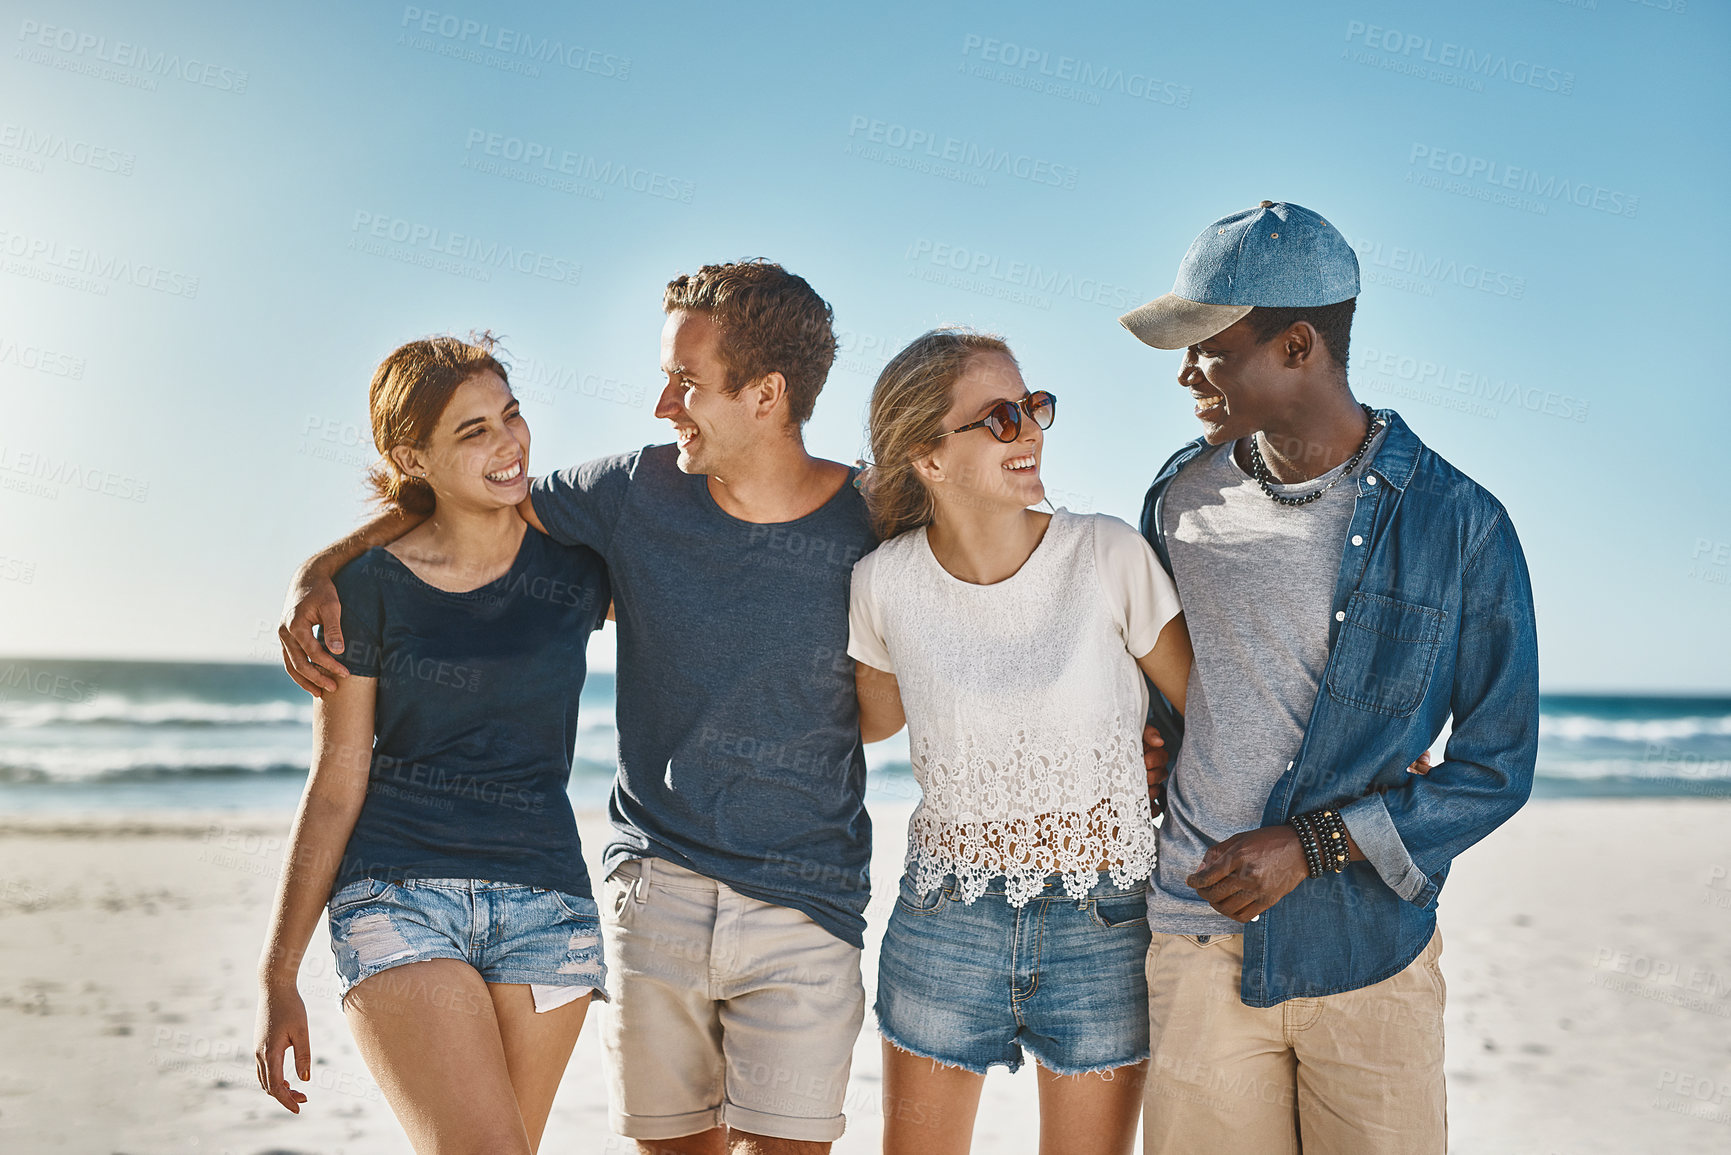 Buy stock photo Shot of a group of happy young friends posing on the beach together